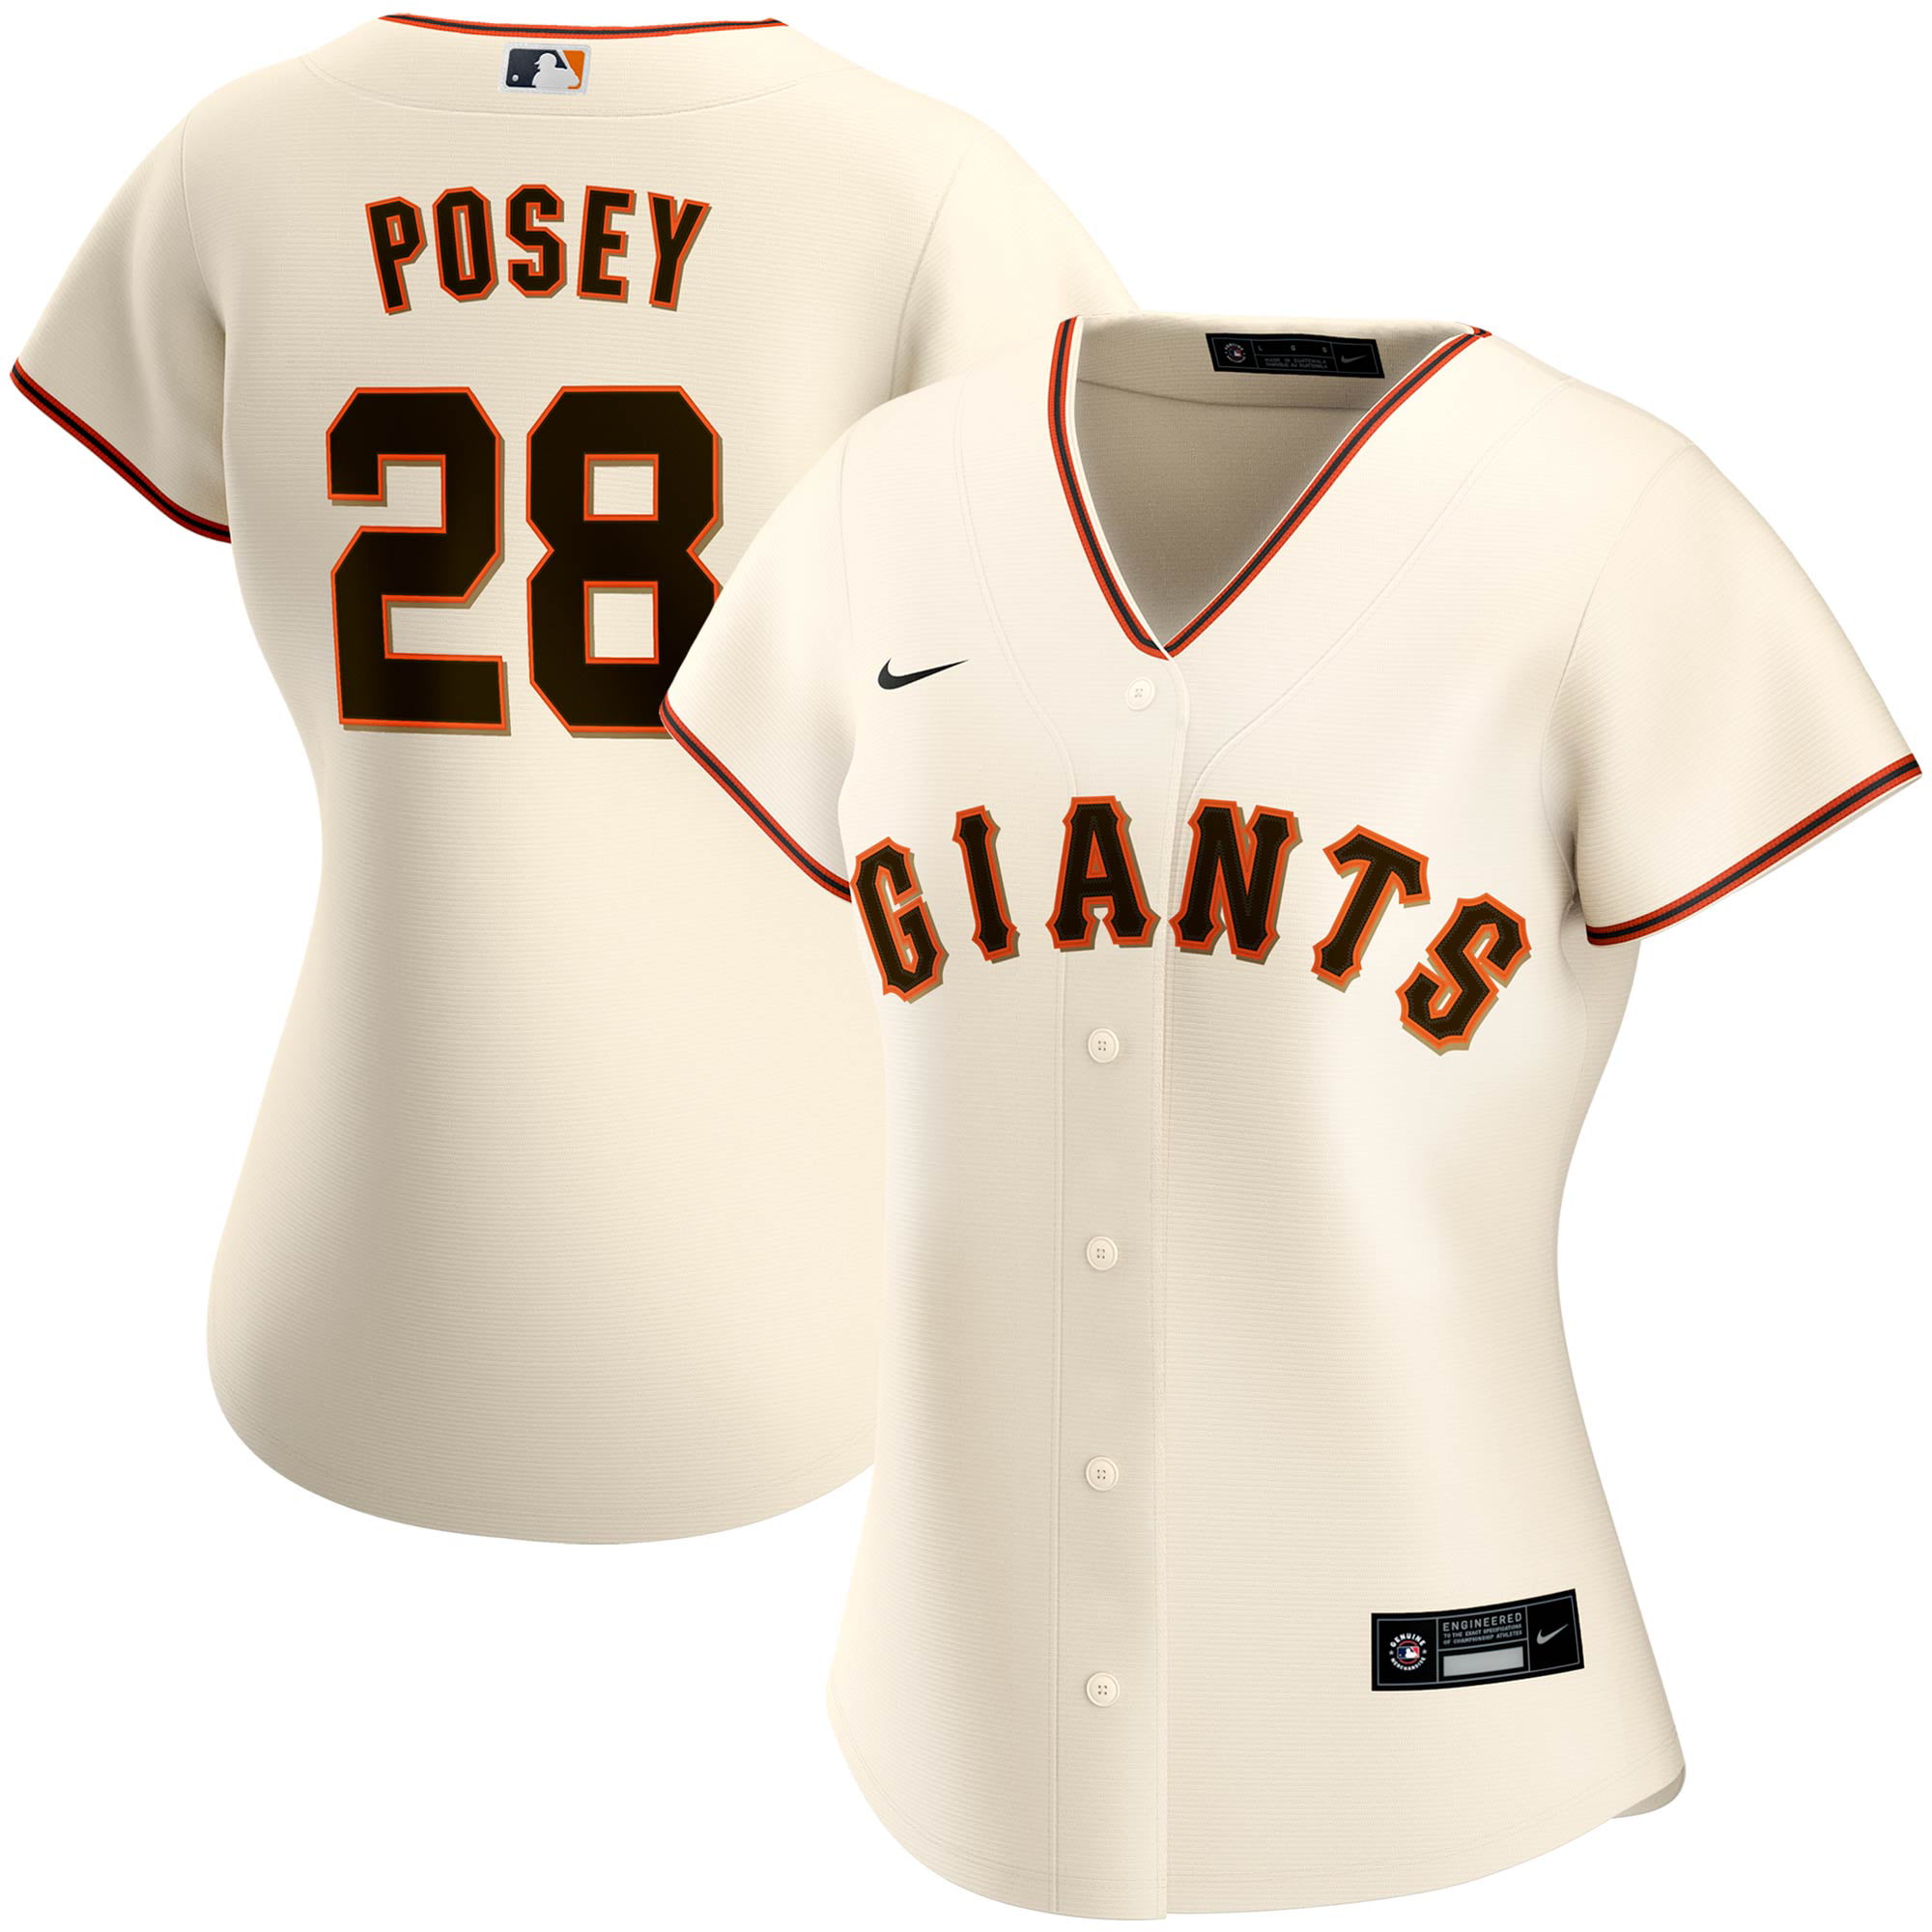 buster posey t shirt jersey